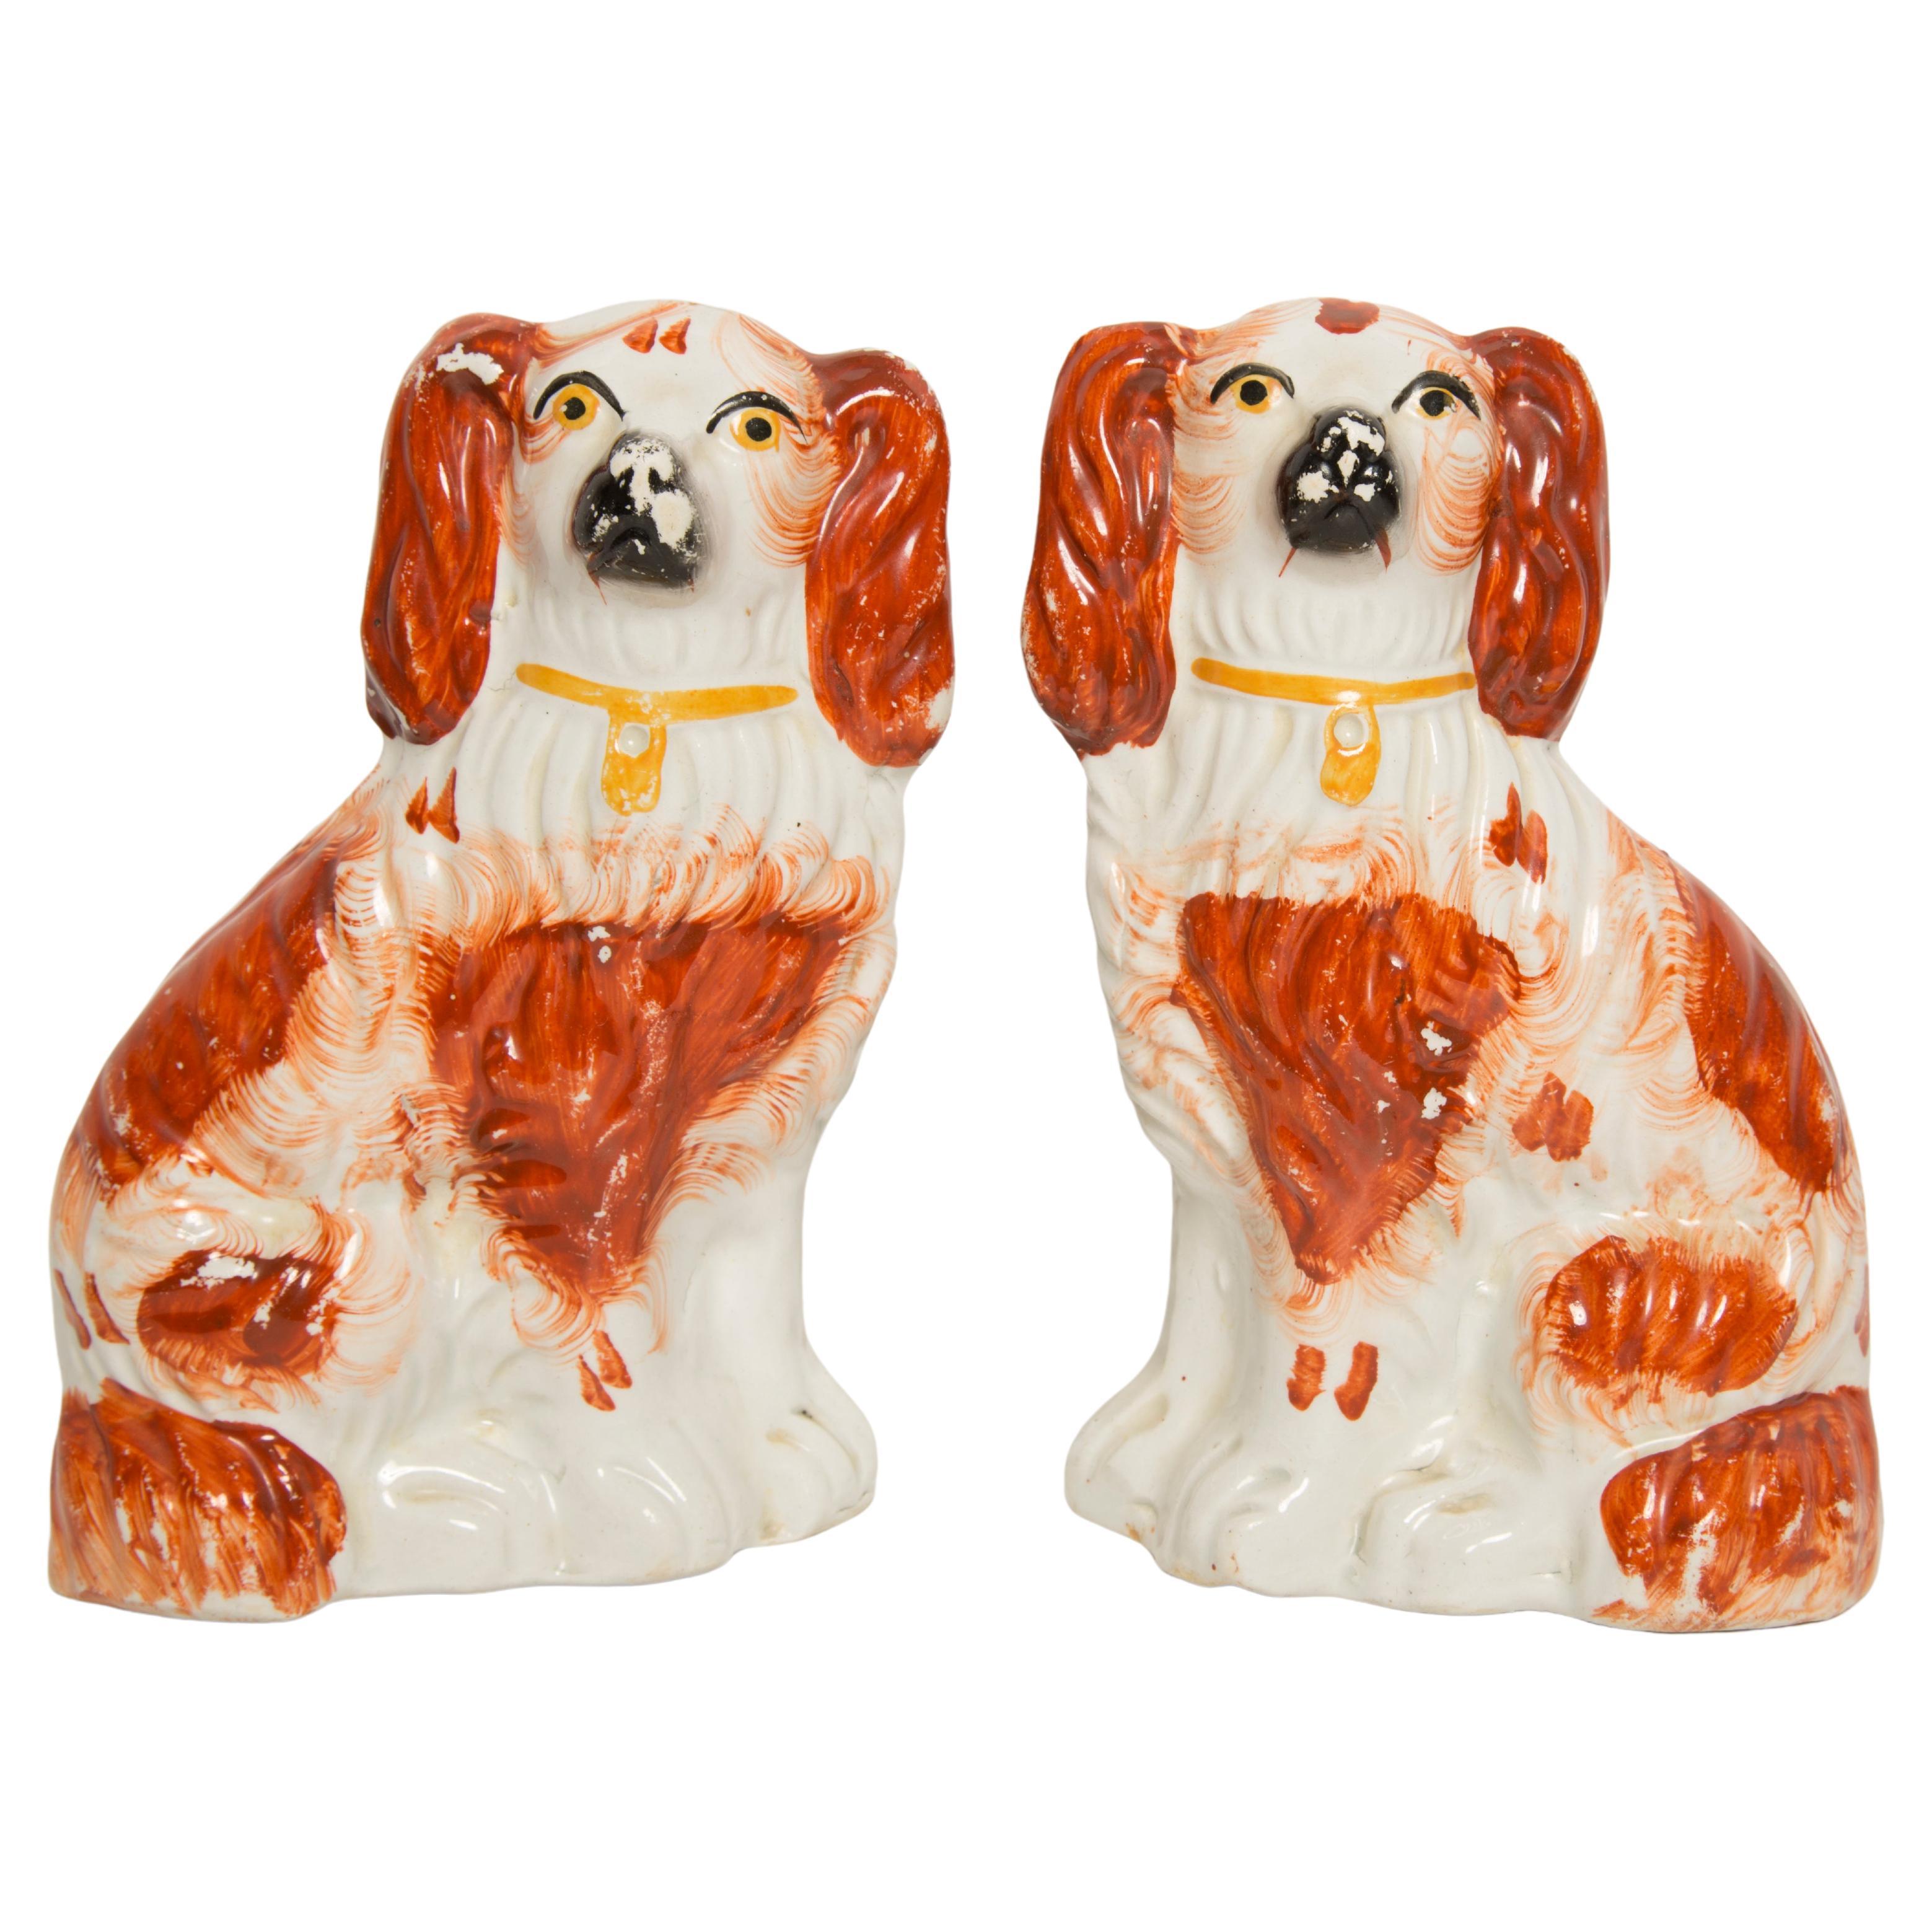 Pair of Mid Century Pottery Spaniel Dogs Sculpture Staffordshire England 1960s